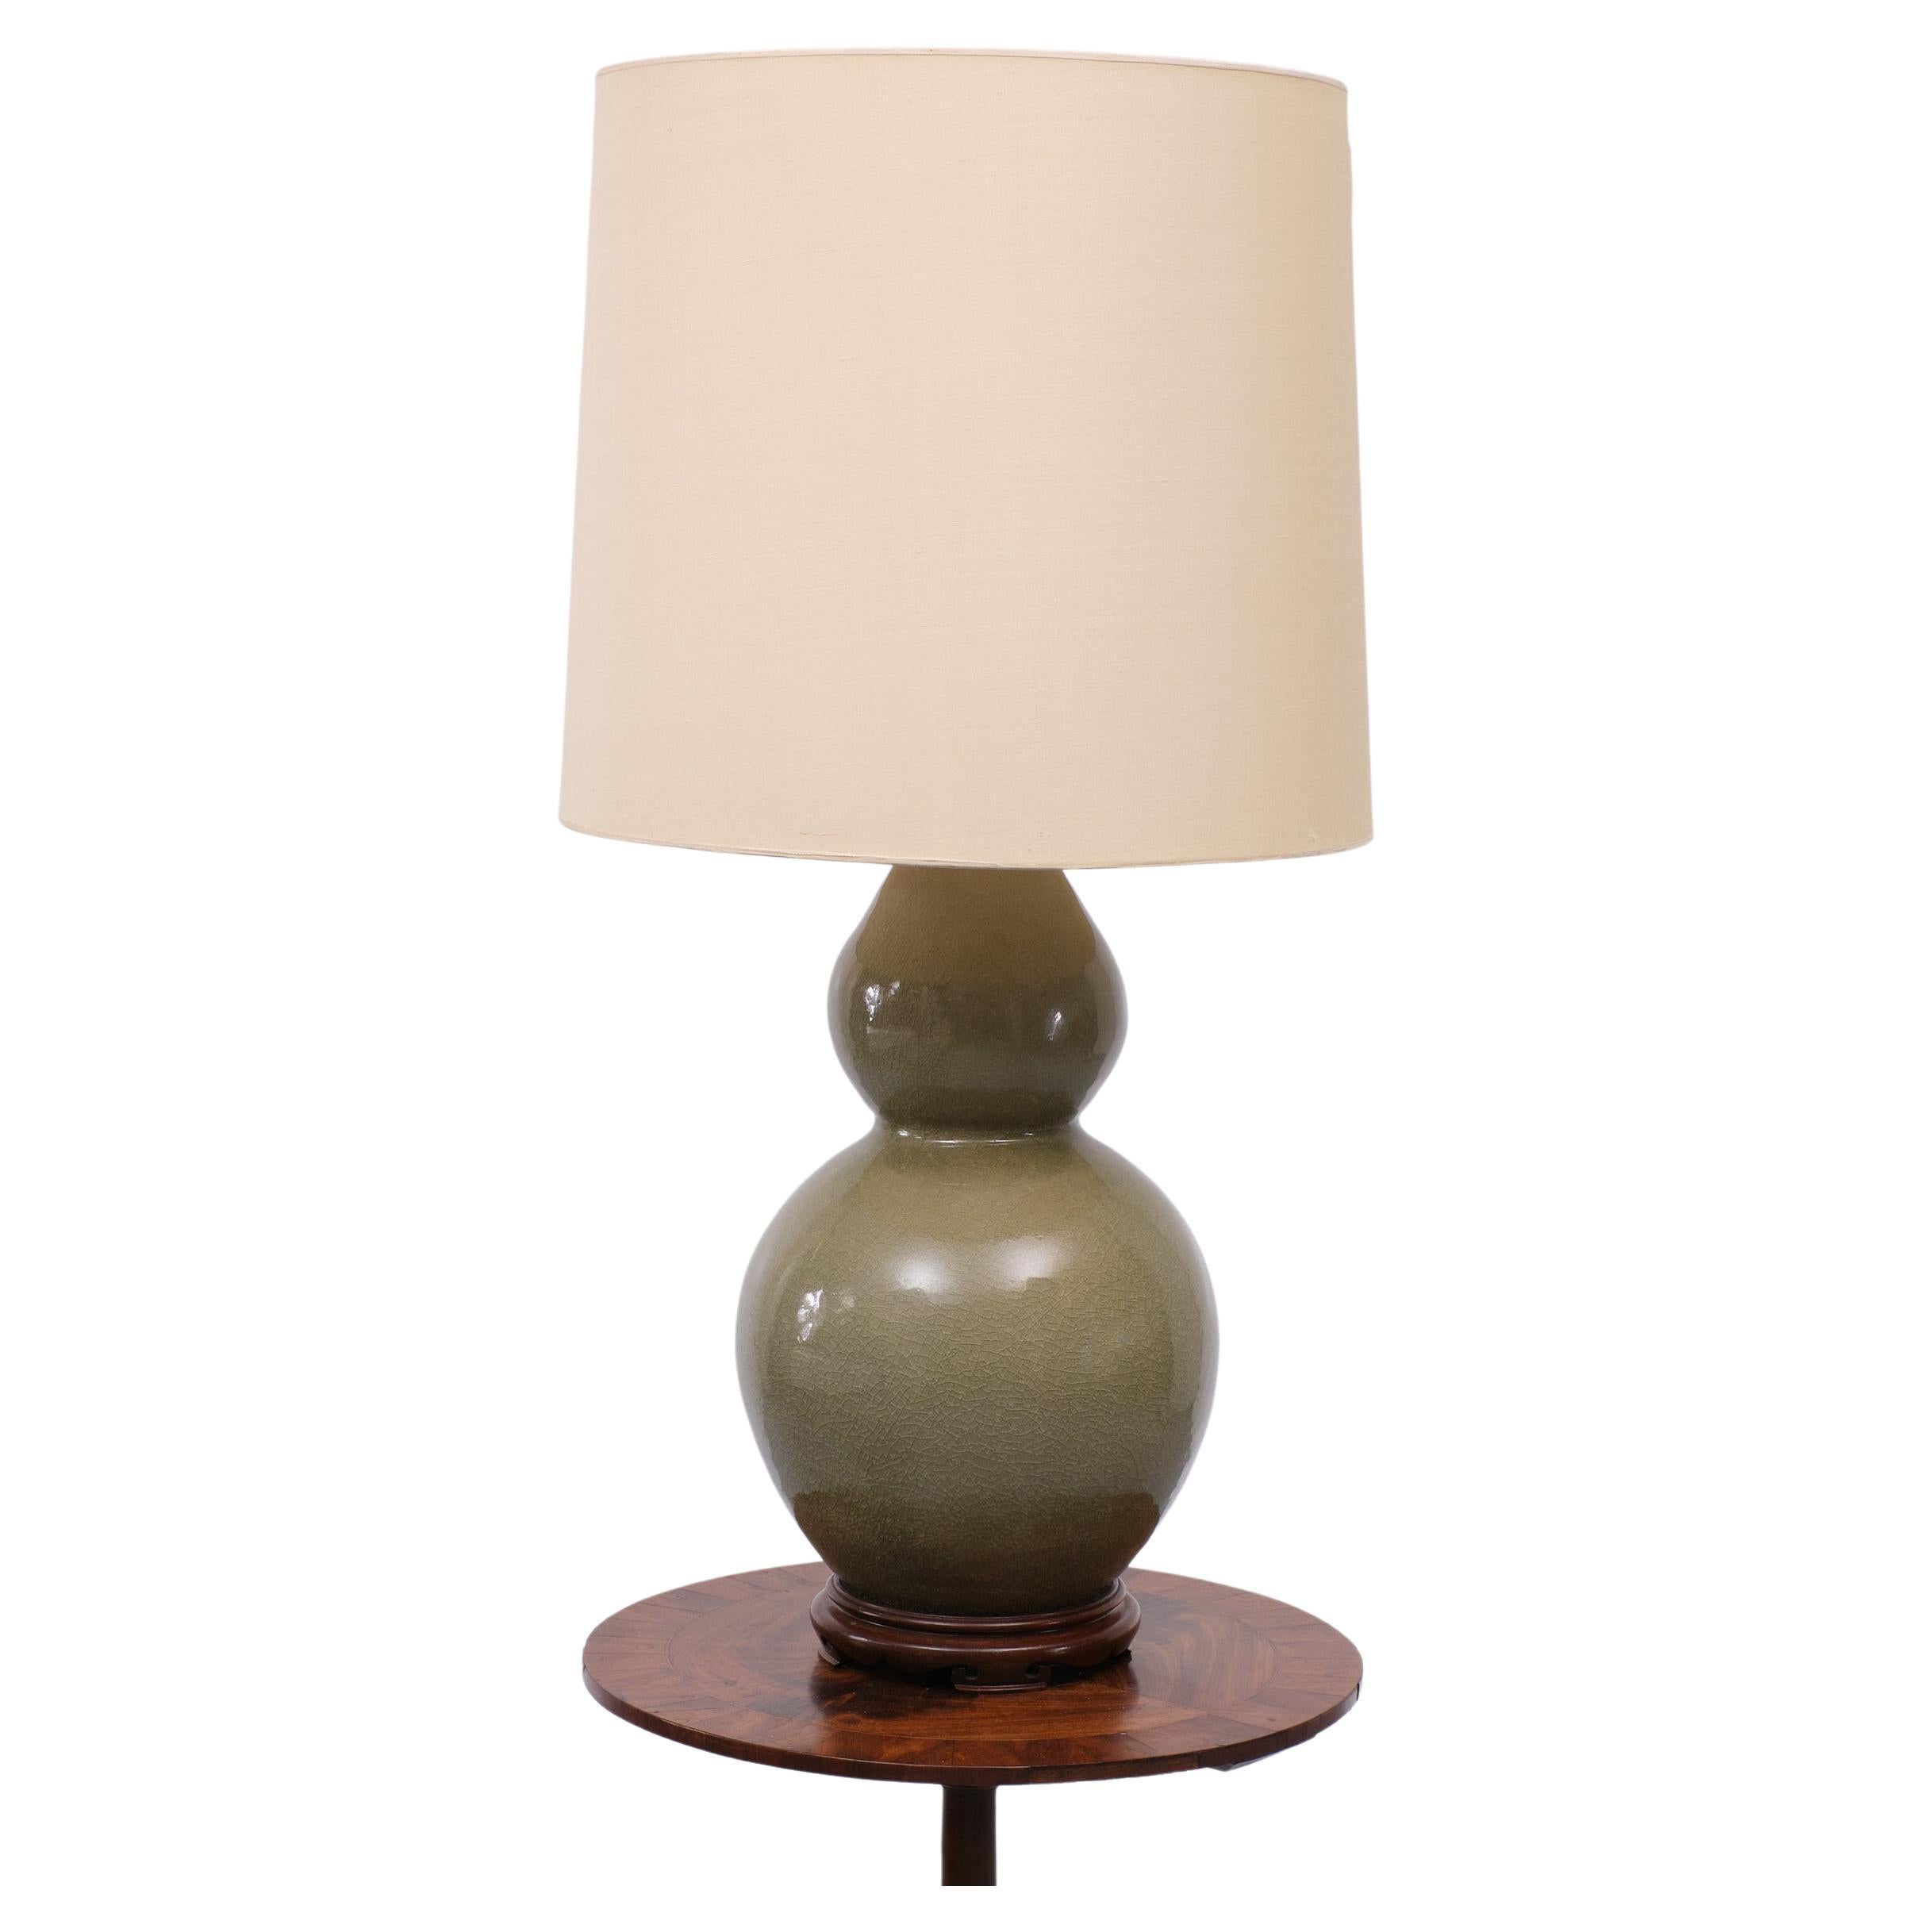 Very nice Large  impressif  Table lamp . In a beathiful Moss Green color  .Calabash  shaped .Oriental Wooden stand . 
Crackled Celadon Porcelain . comes with the original shade . One large E27 bulb needed .
Very good quality lamp . 
